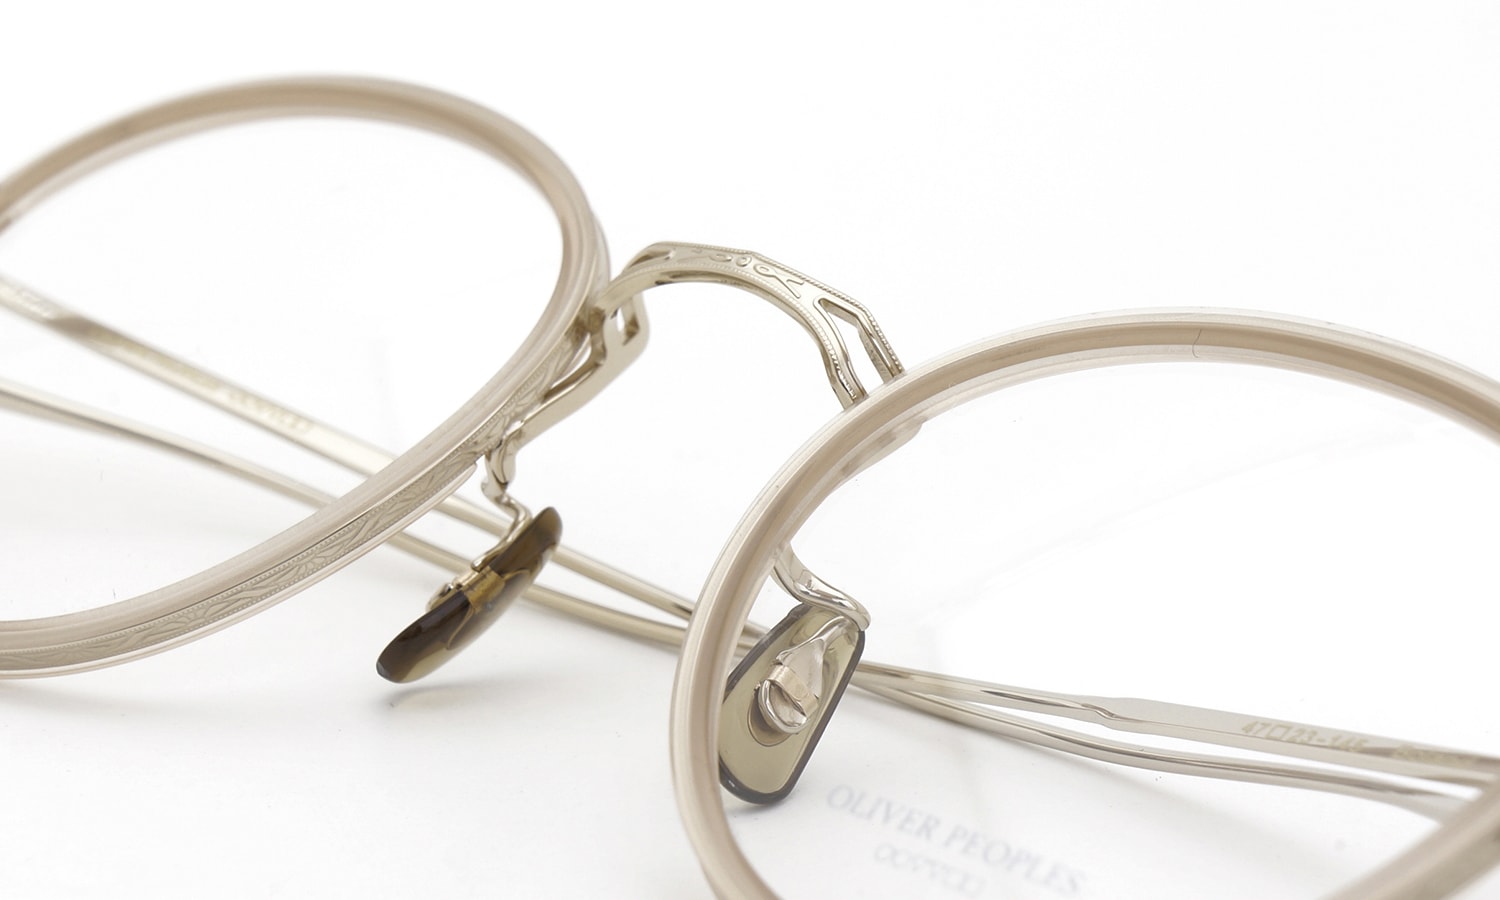 OLIVER PEOPLES Boland PB